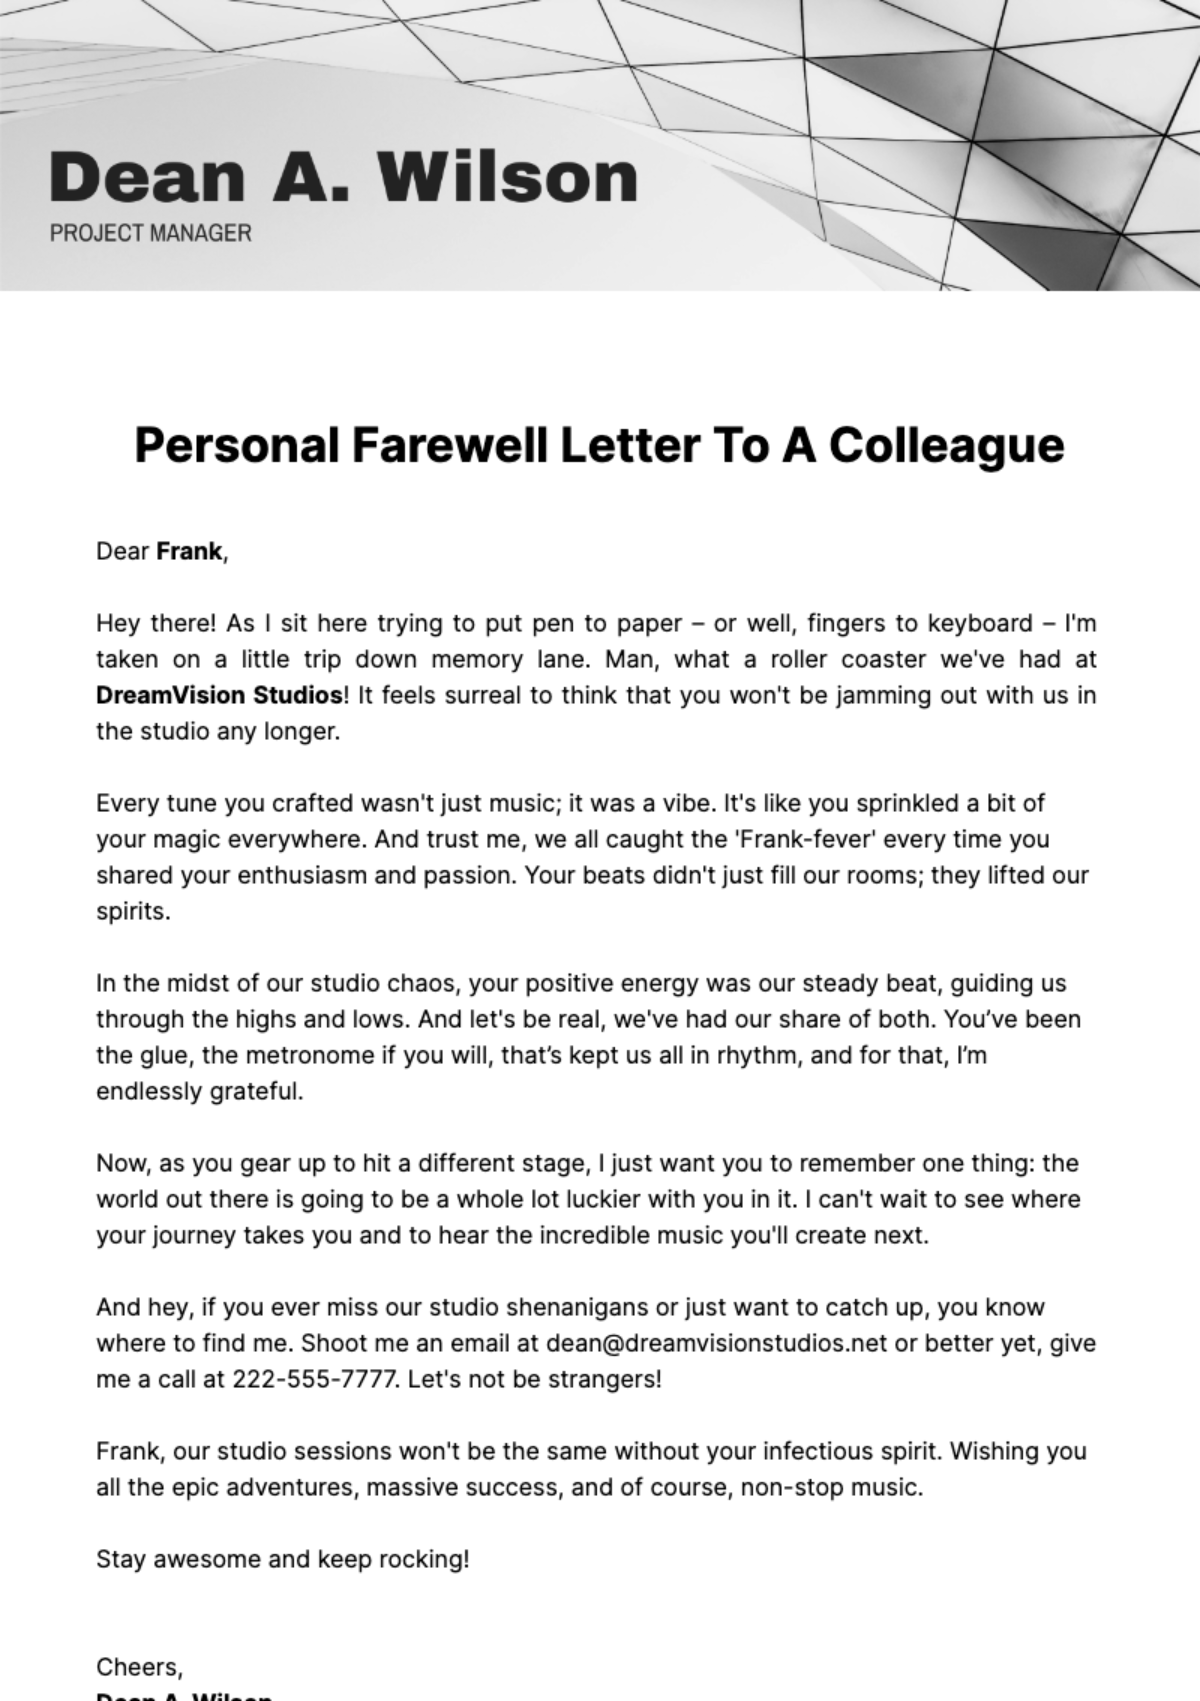 Free Personal Farewell Letter to a Colleague  Template